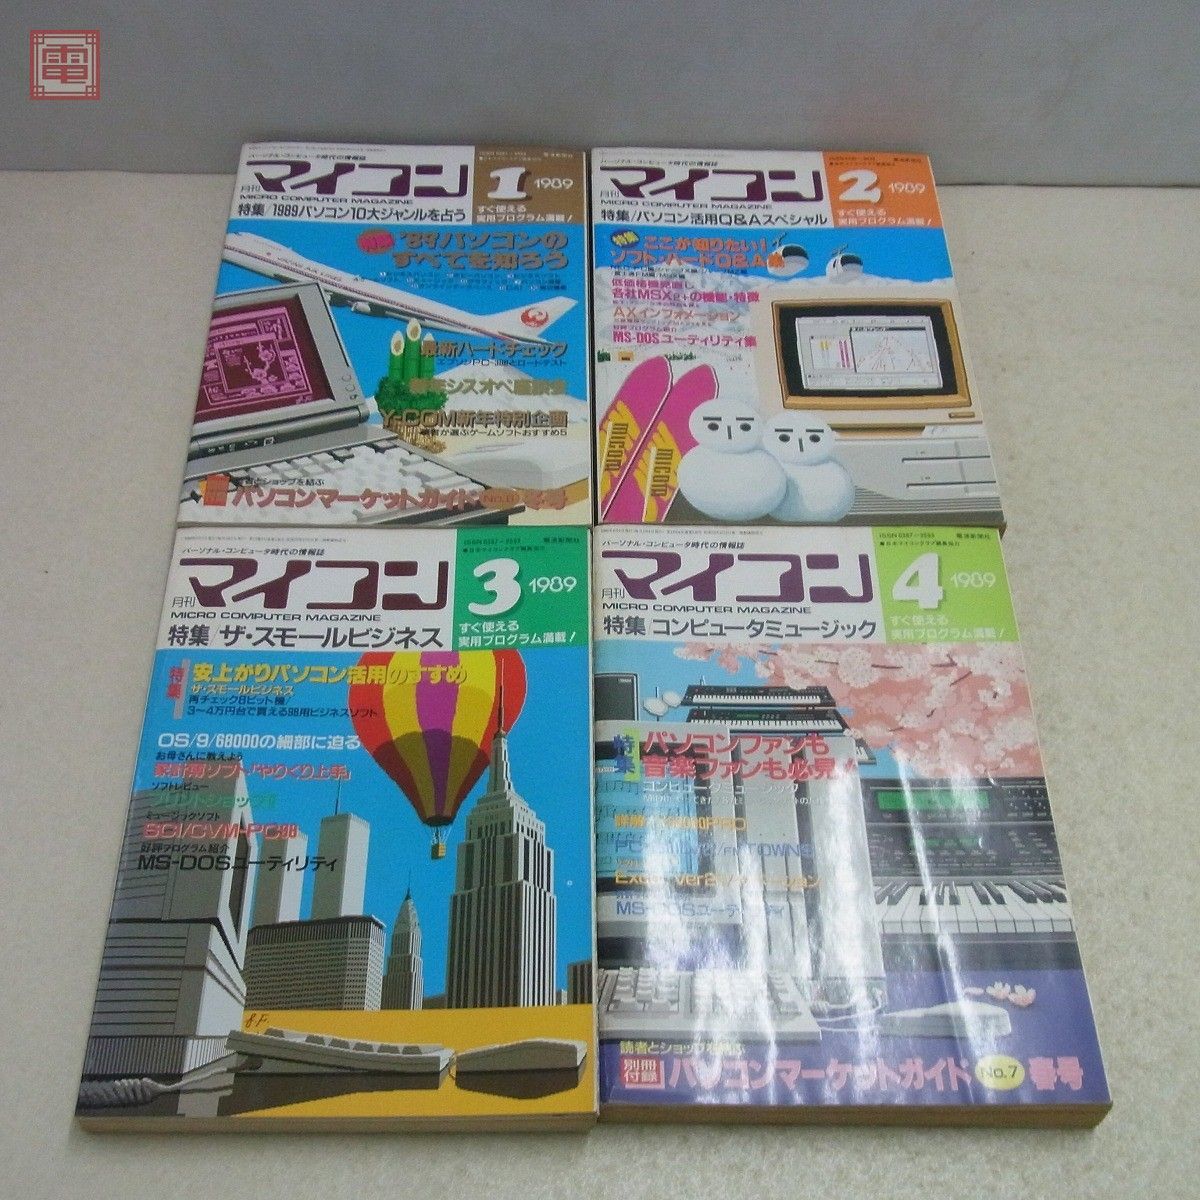  magazine monthly microcomputer 1989 year 11 pcs. set don't fit radio wave newspaper company [20